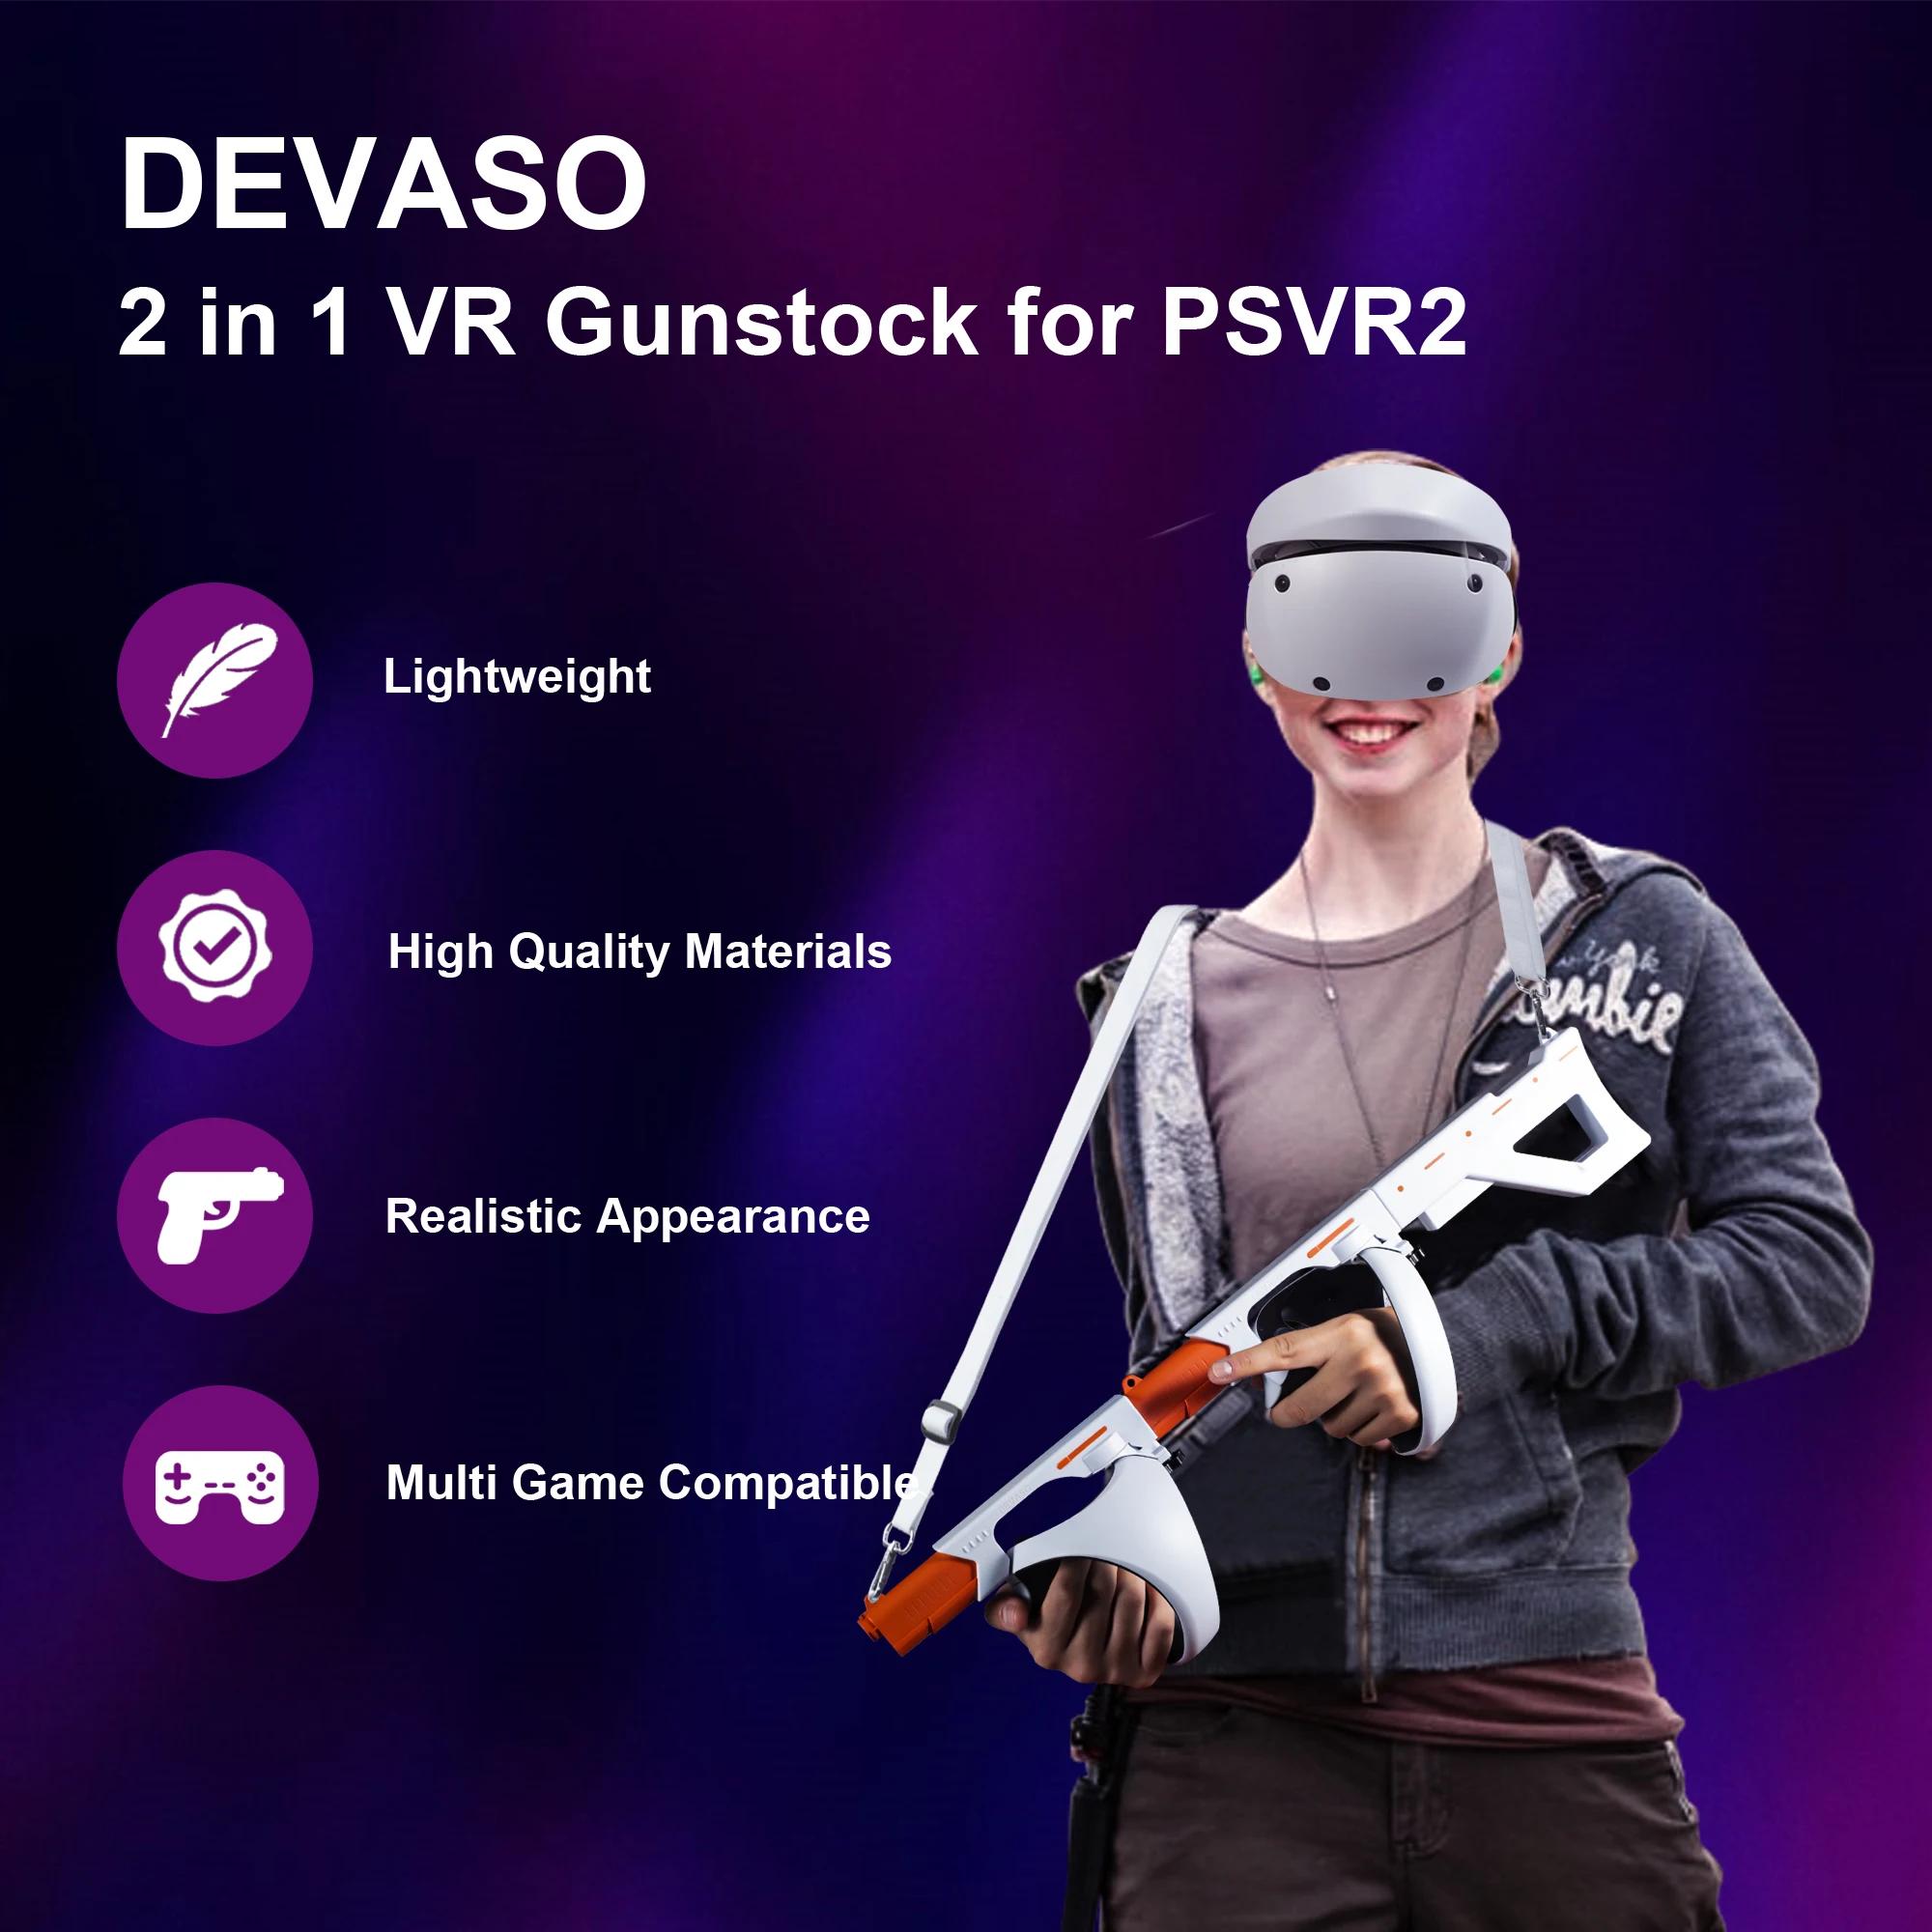 2 in 1 VR ǽ,  PS VR2  극ũ  ׳ƽ ֽ ׼, ٵ    ׼